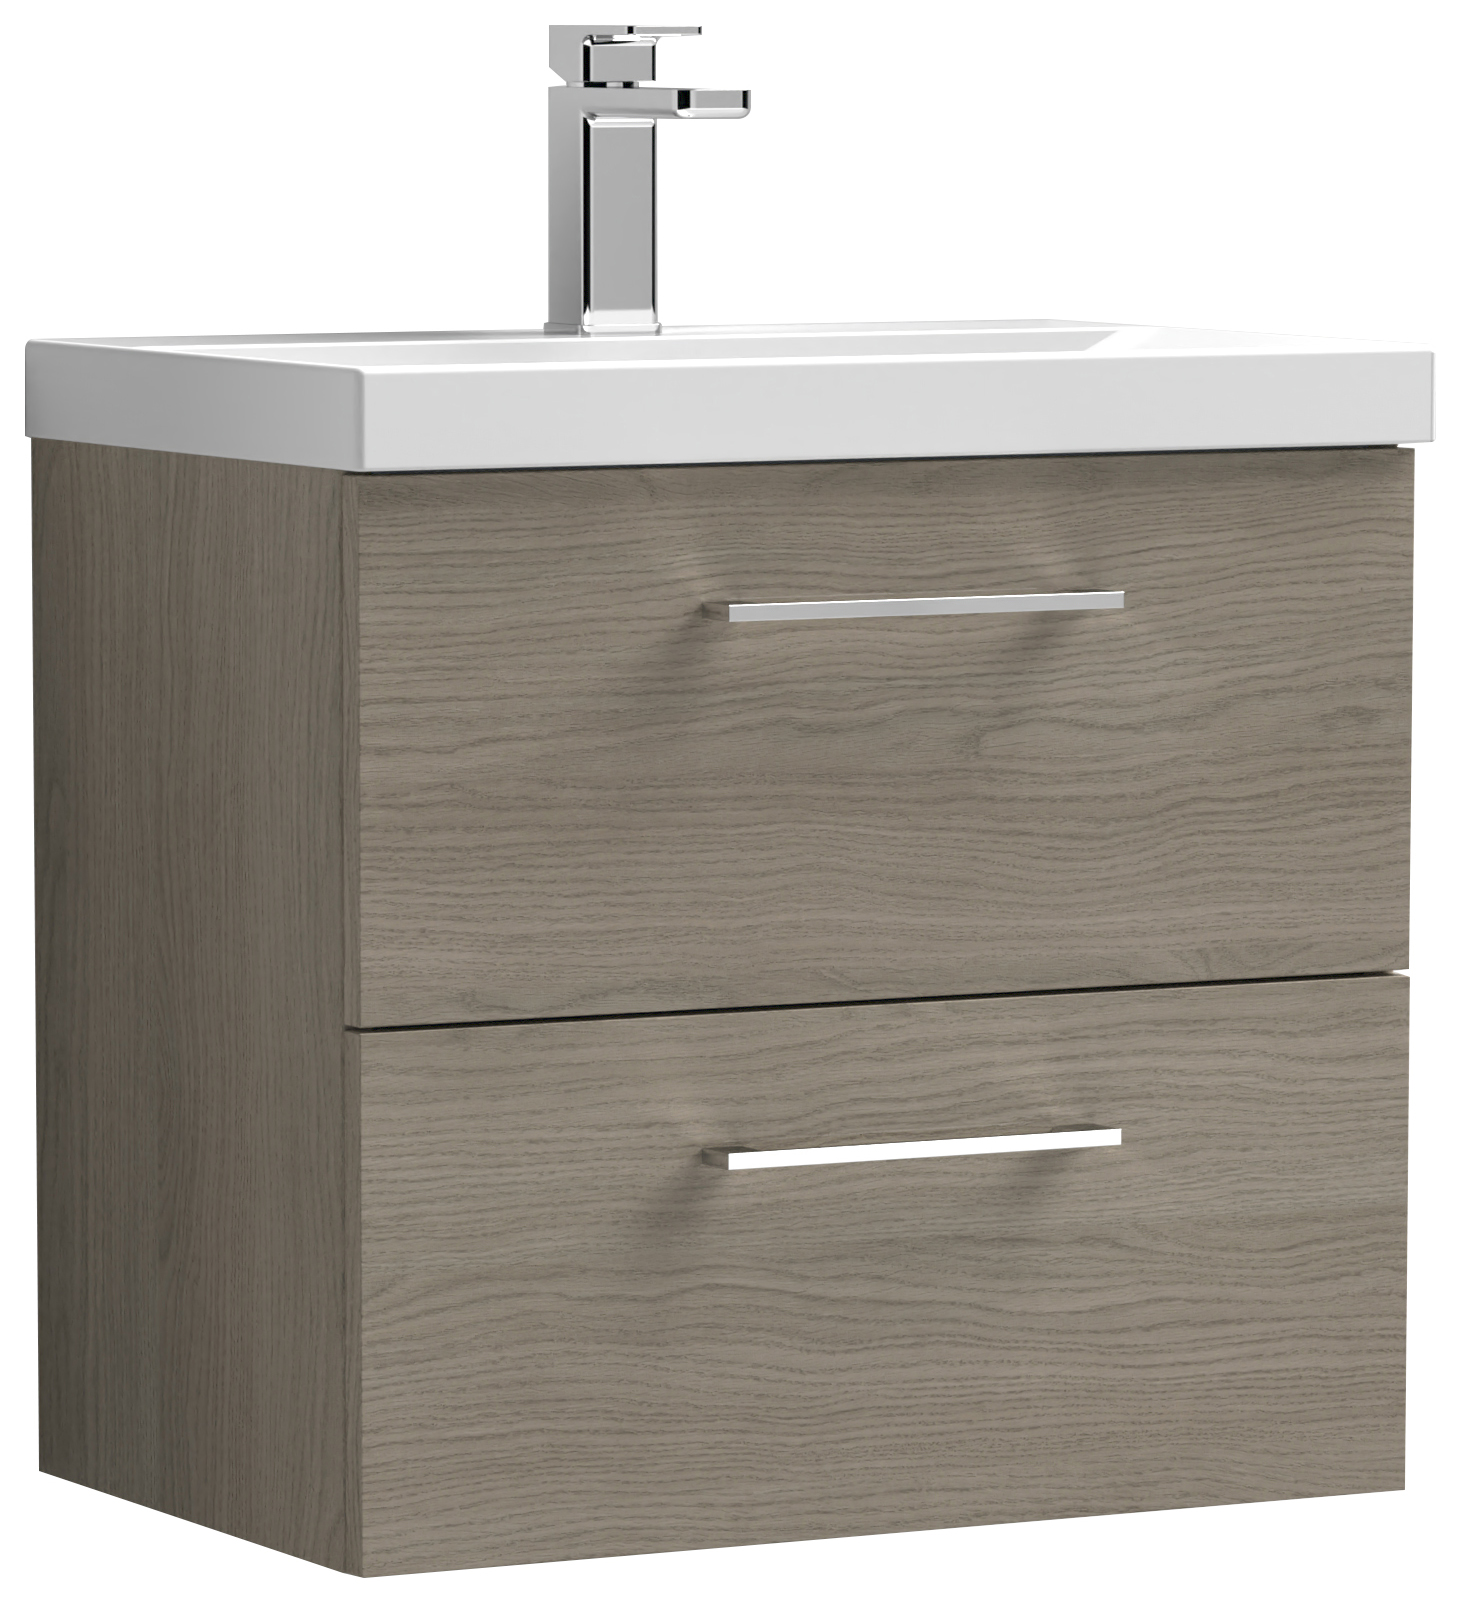 Nuie Arno Solace Oak Wall Hung 2 Drawer Vanity Unit & Basin - 579 x 610mm